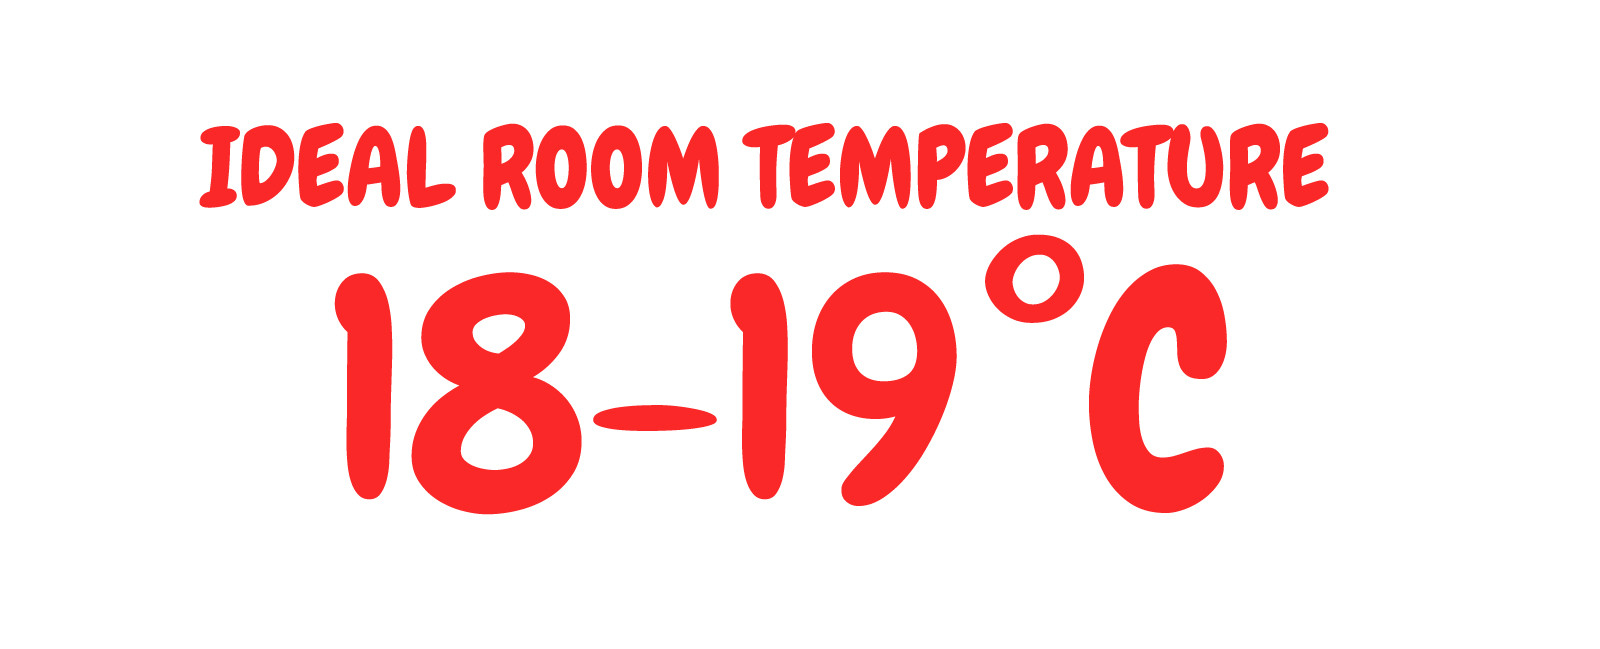 What S The Ideal Room Temperature Not Too Hot Not Too Cold Just Nice Heatable